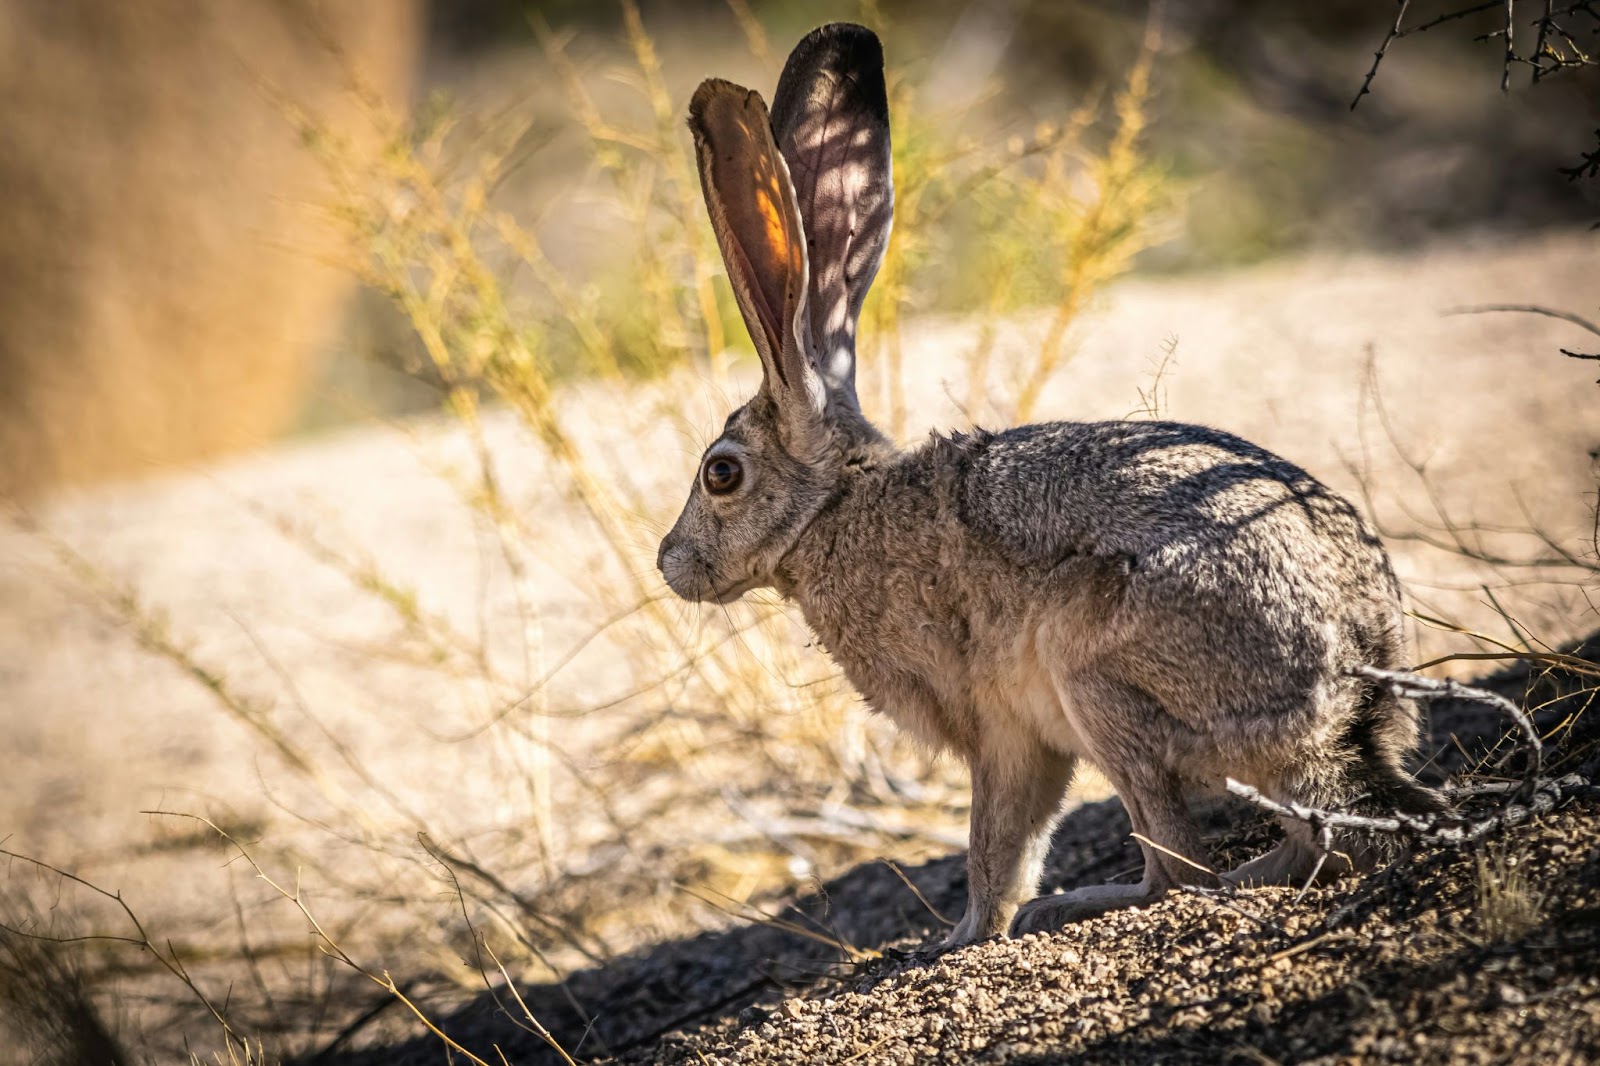 There is much wildlife to see at Joshua Tree during spring.
pictured: wildlife in Joshua Tree